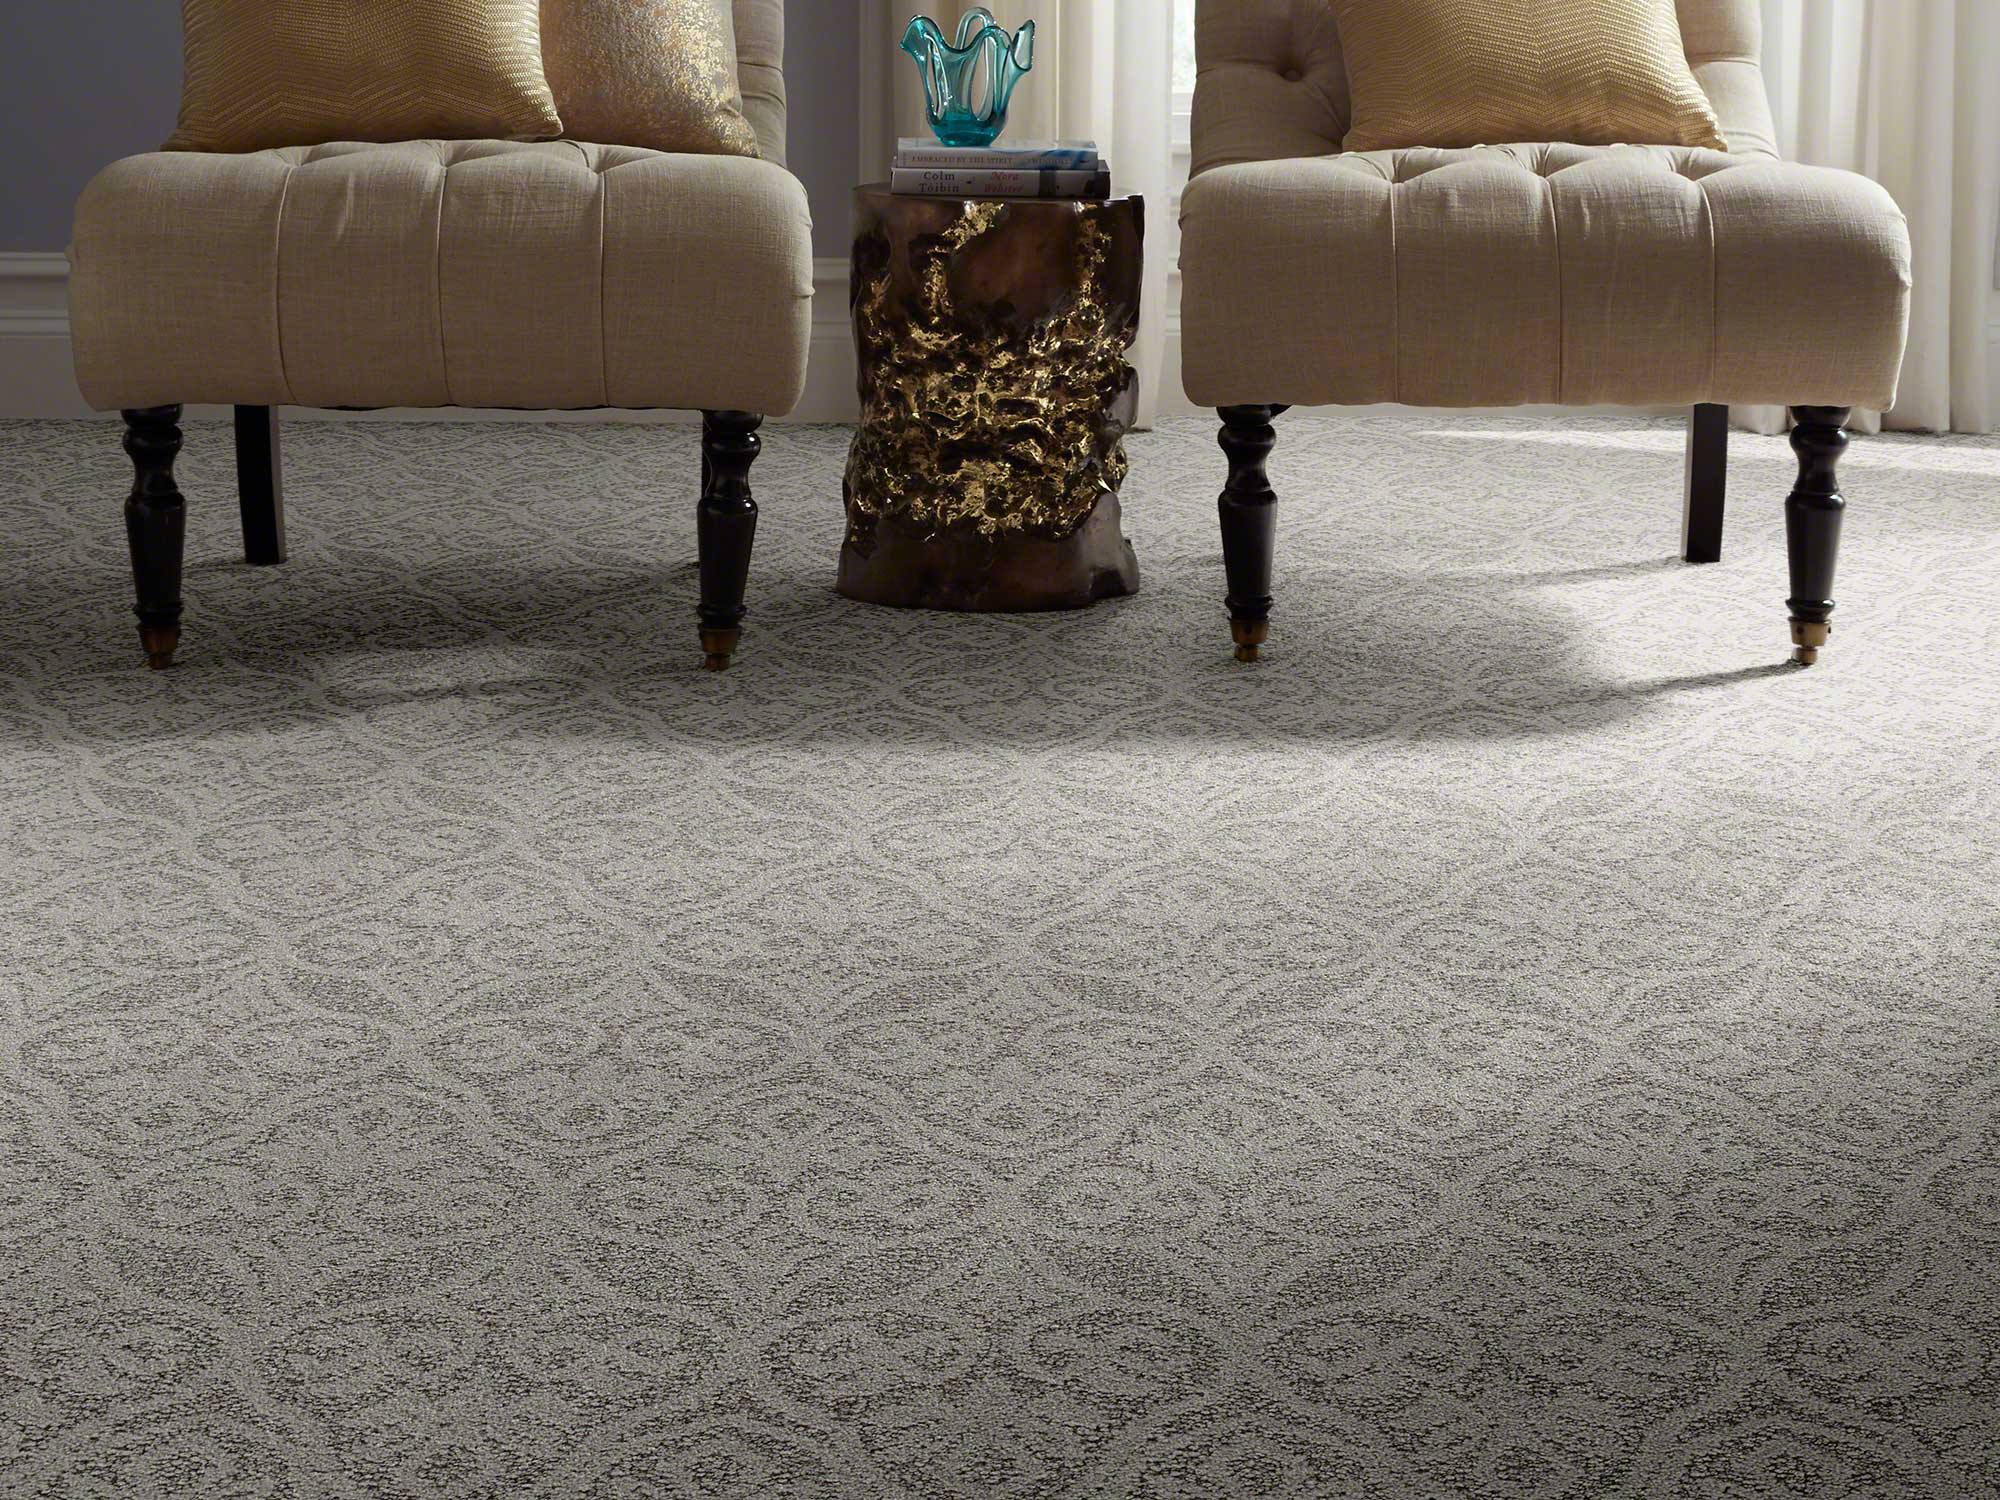 Shaw carpet is a new trend in interior